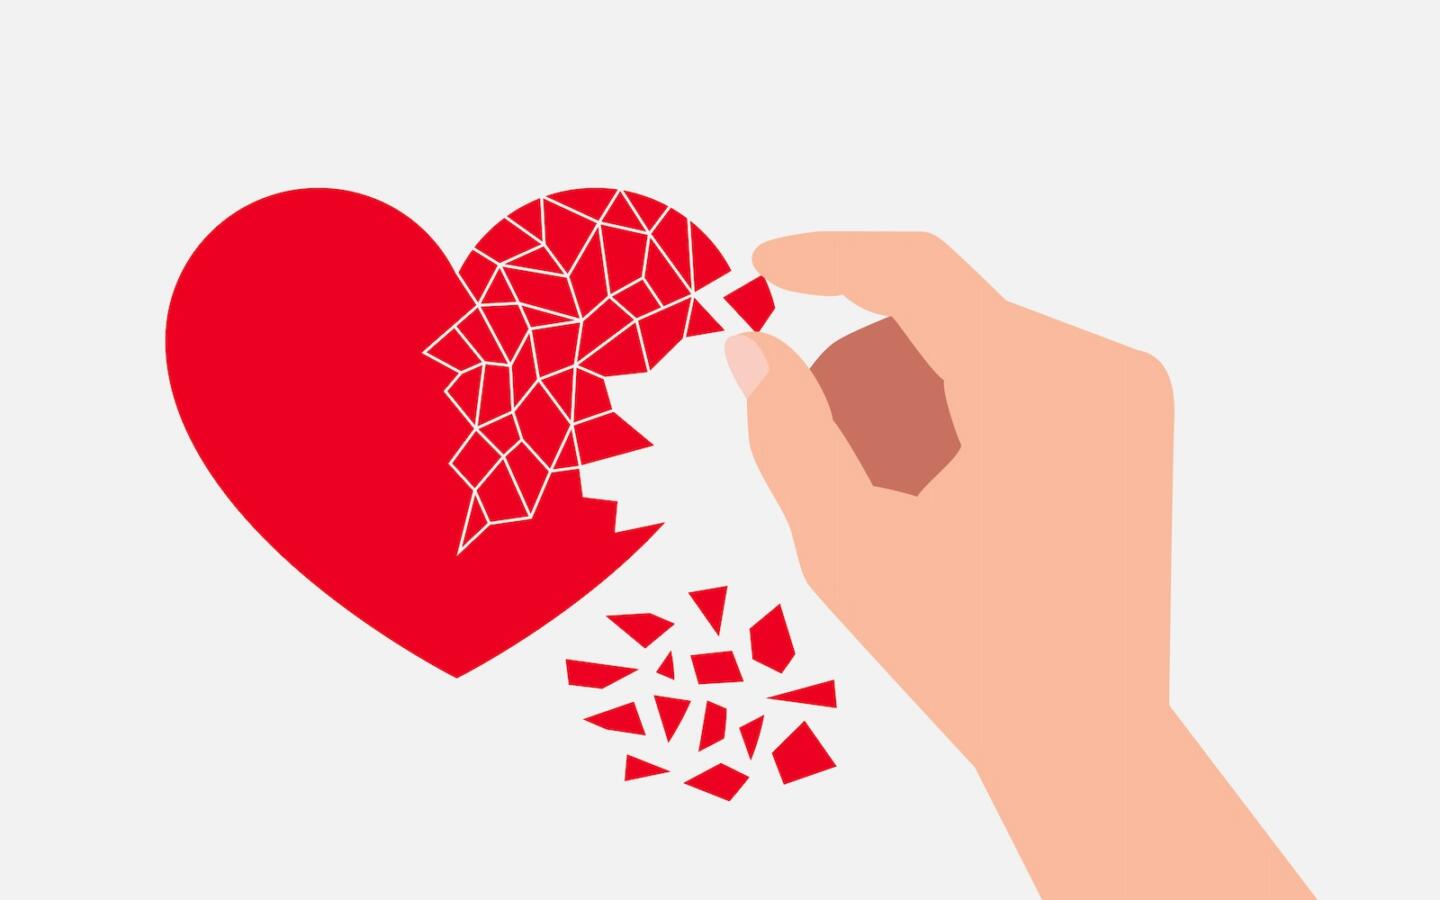 Heart symbol broken into small pieces and hand of person assembling it